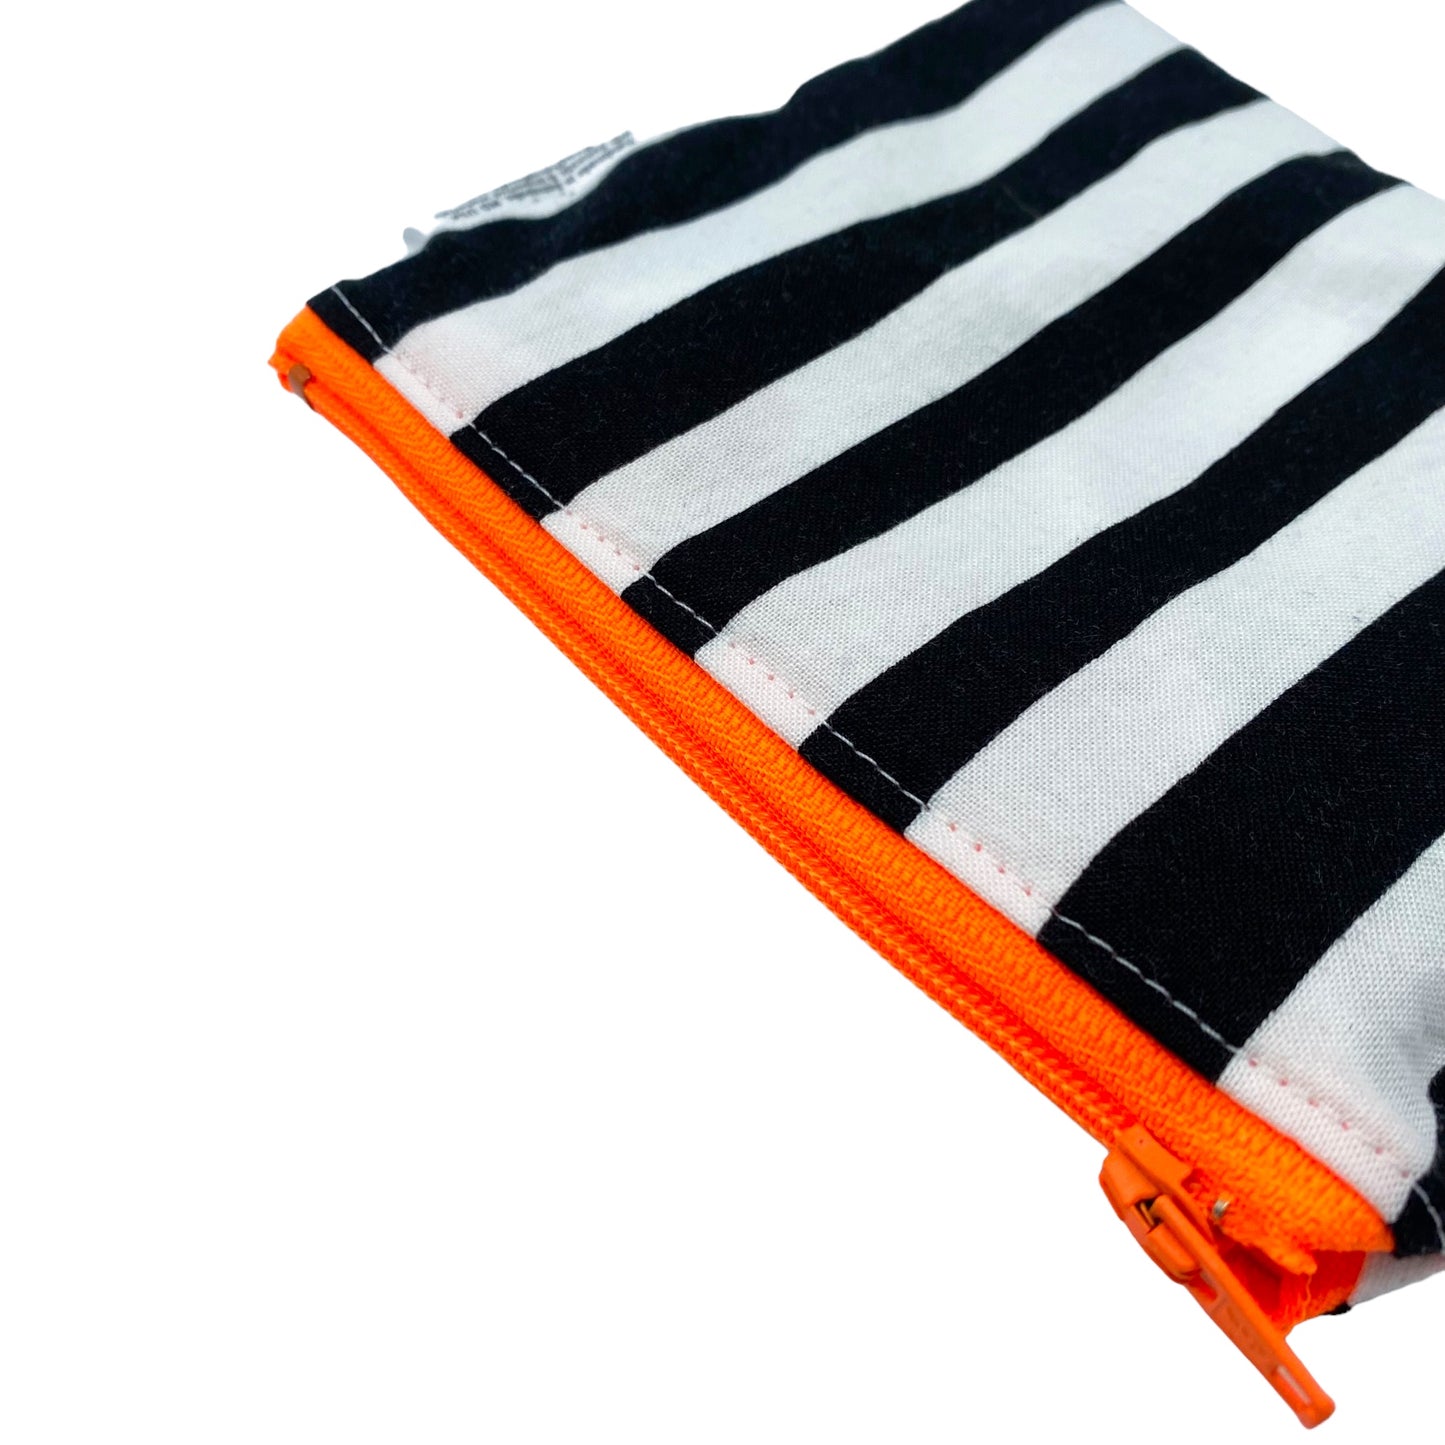 Toddler Sized Reusable Zippered Bag Stripes Wonky Black and White